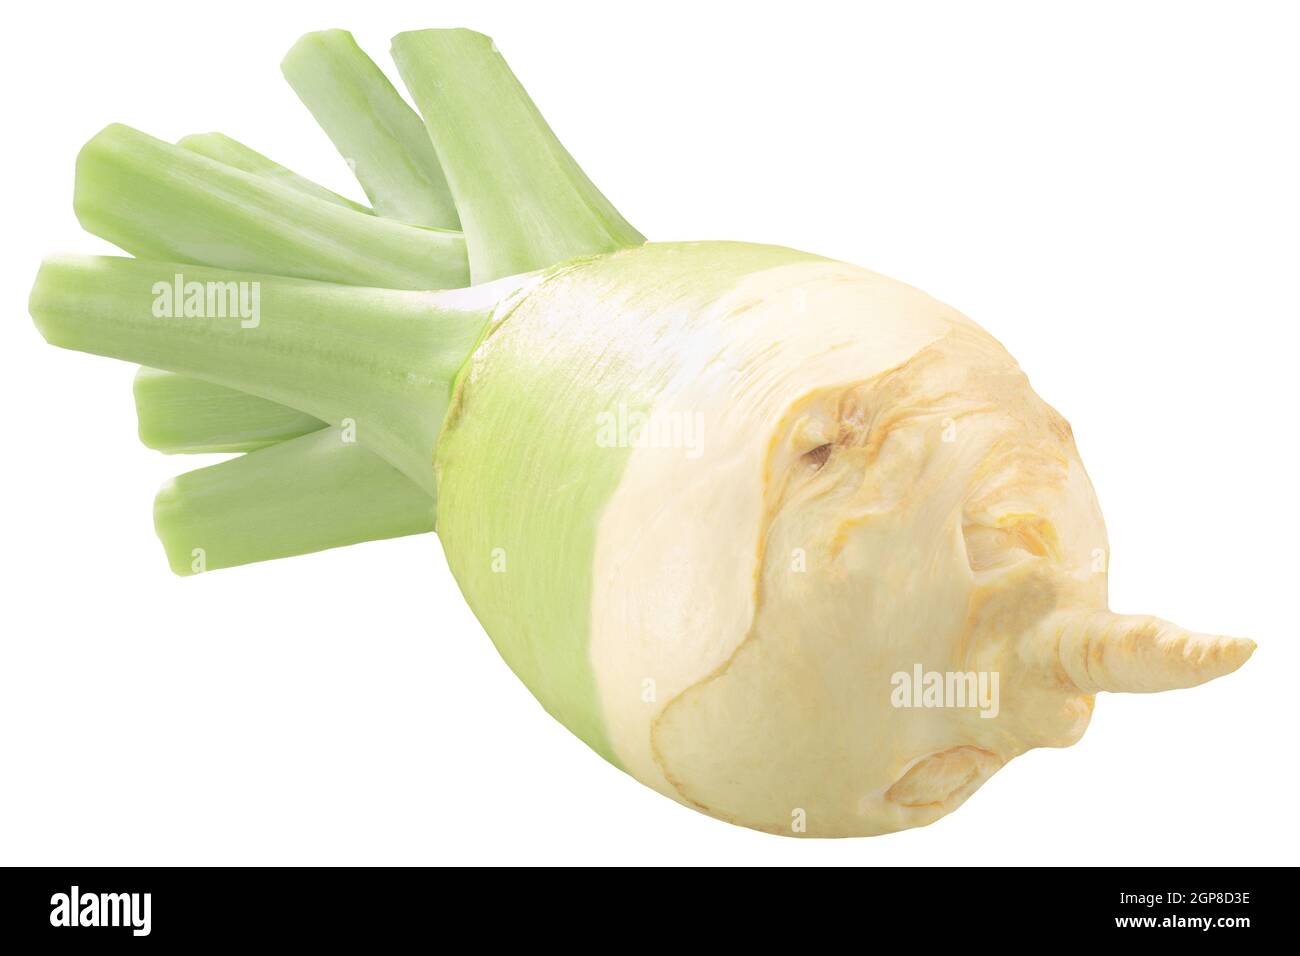 Rutabaga or Swede root vegetable (Brassica napus), isolated Stock Photo